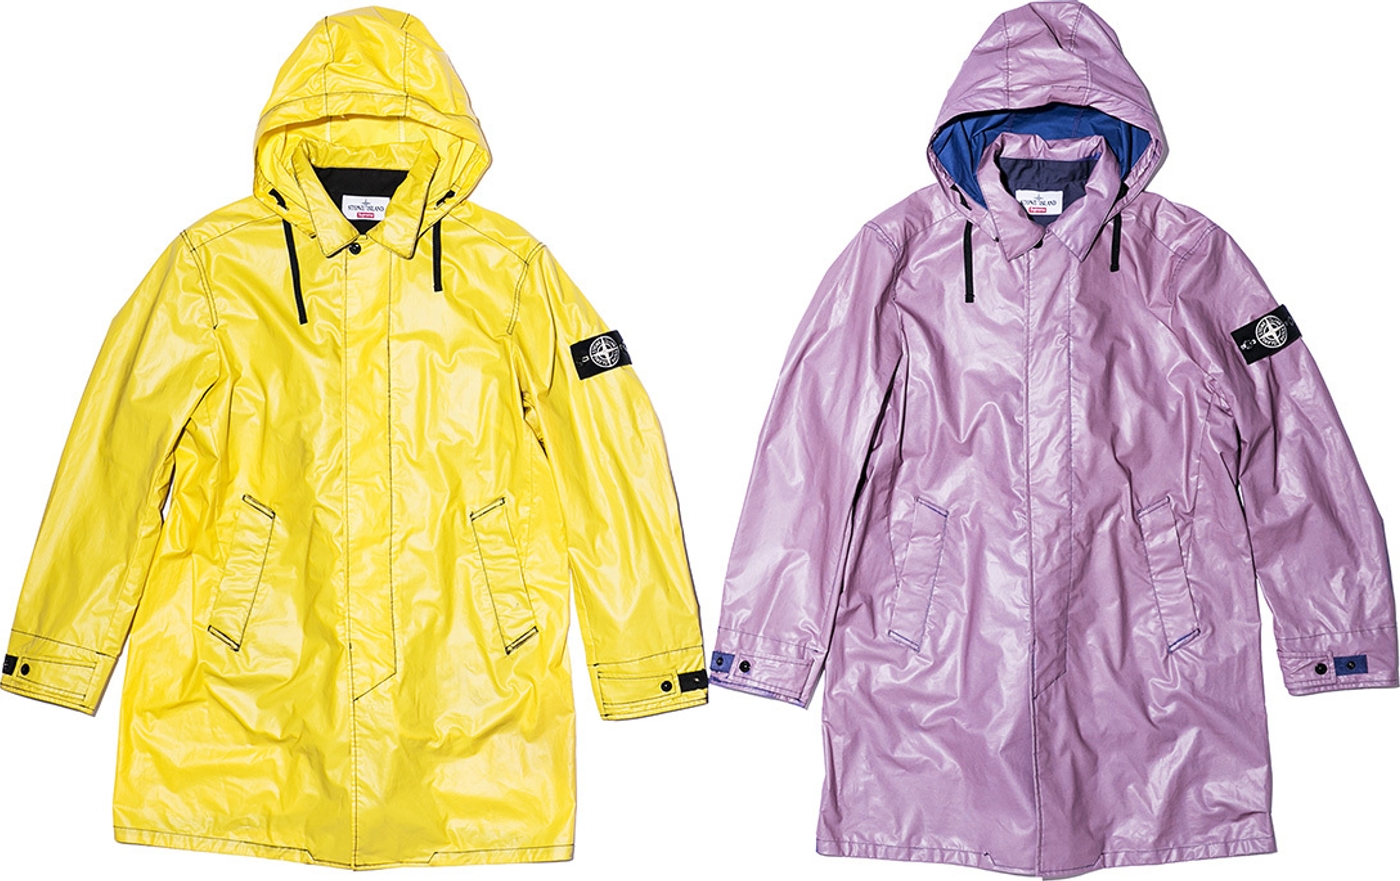 Water resistant thermosensitive Heat Reactive polyurethane coated cotton fabric with removable hood. (9/24)